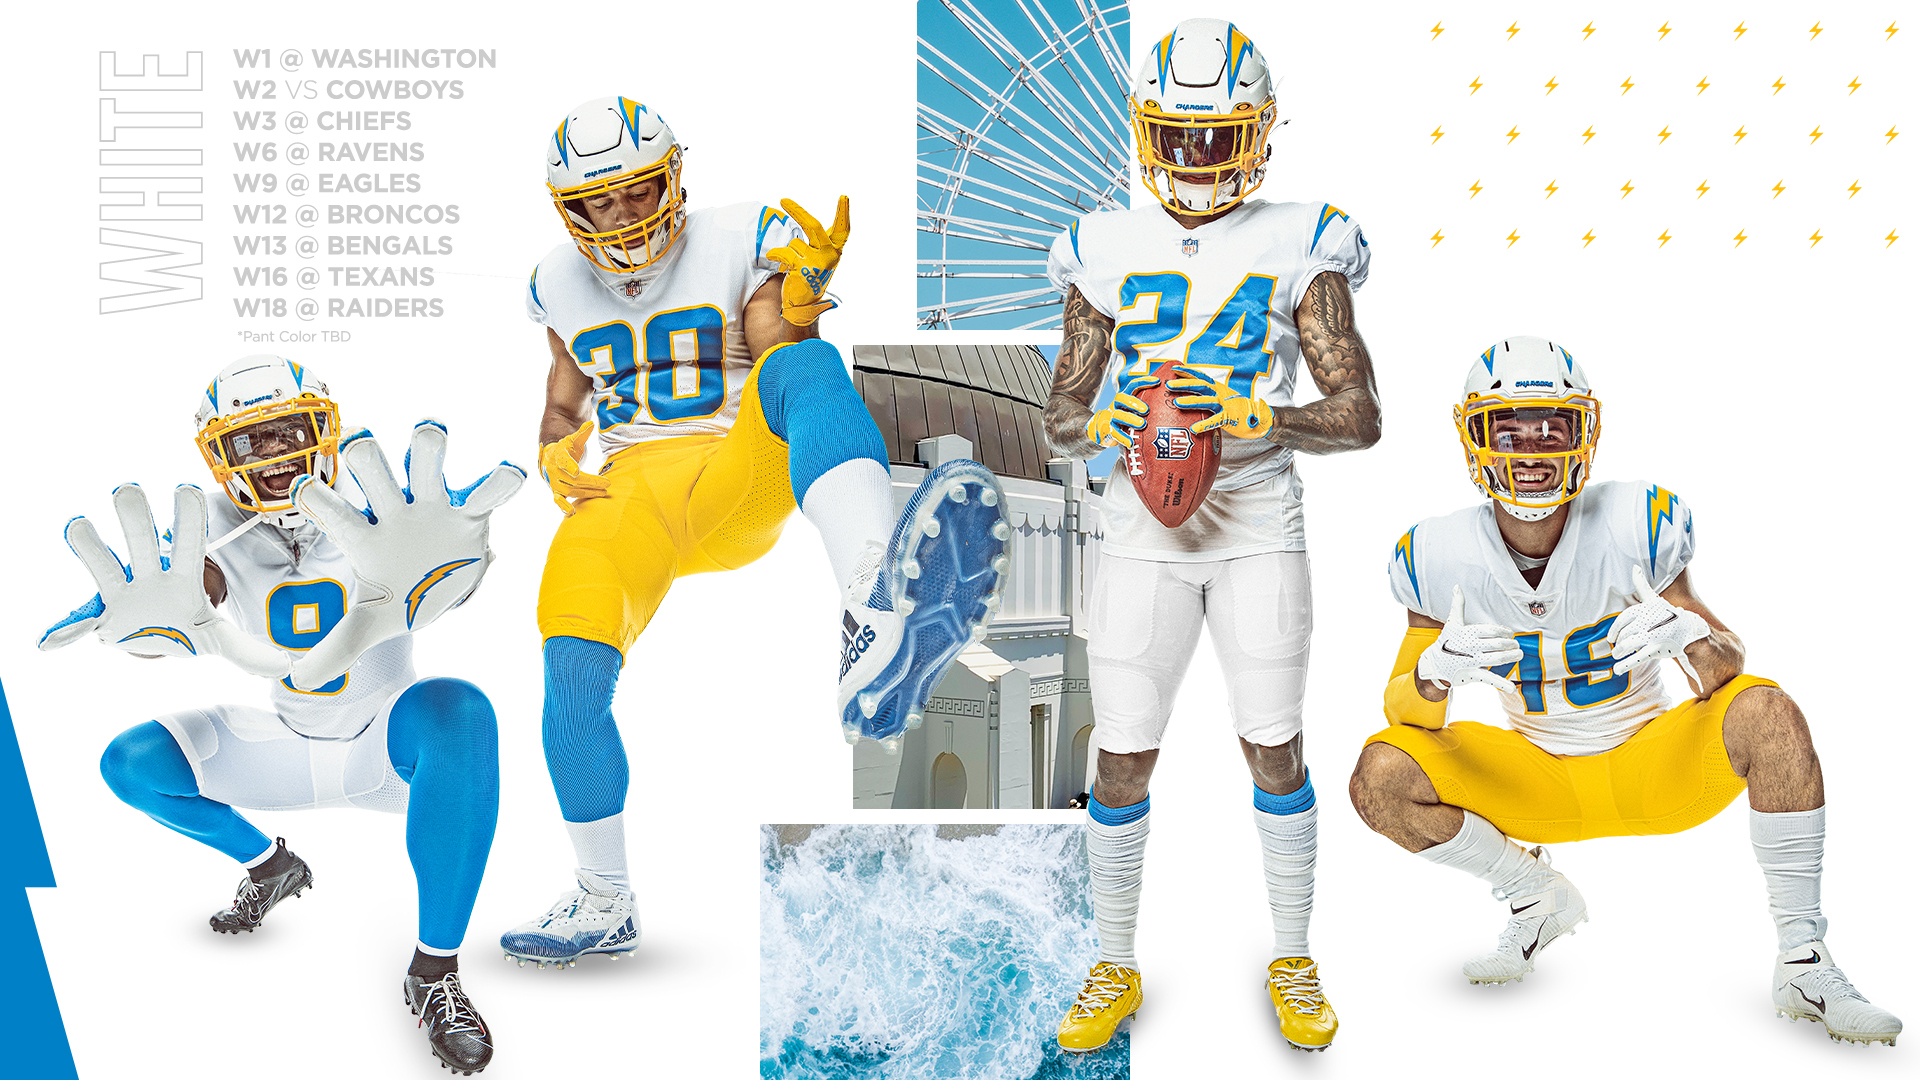 ⚡️ Los Angeles Chargers (LAC) Uniform Tracker ⚡️ on Twitter: Heading into  TNF vs KC, @Chargers' 2021 uniform matrix. Bolts are 6-4 (0-2 road, 6-2  home; 5-1 w/white, 1-3 w/gold) wearing powder